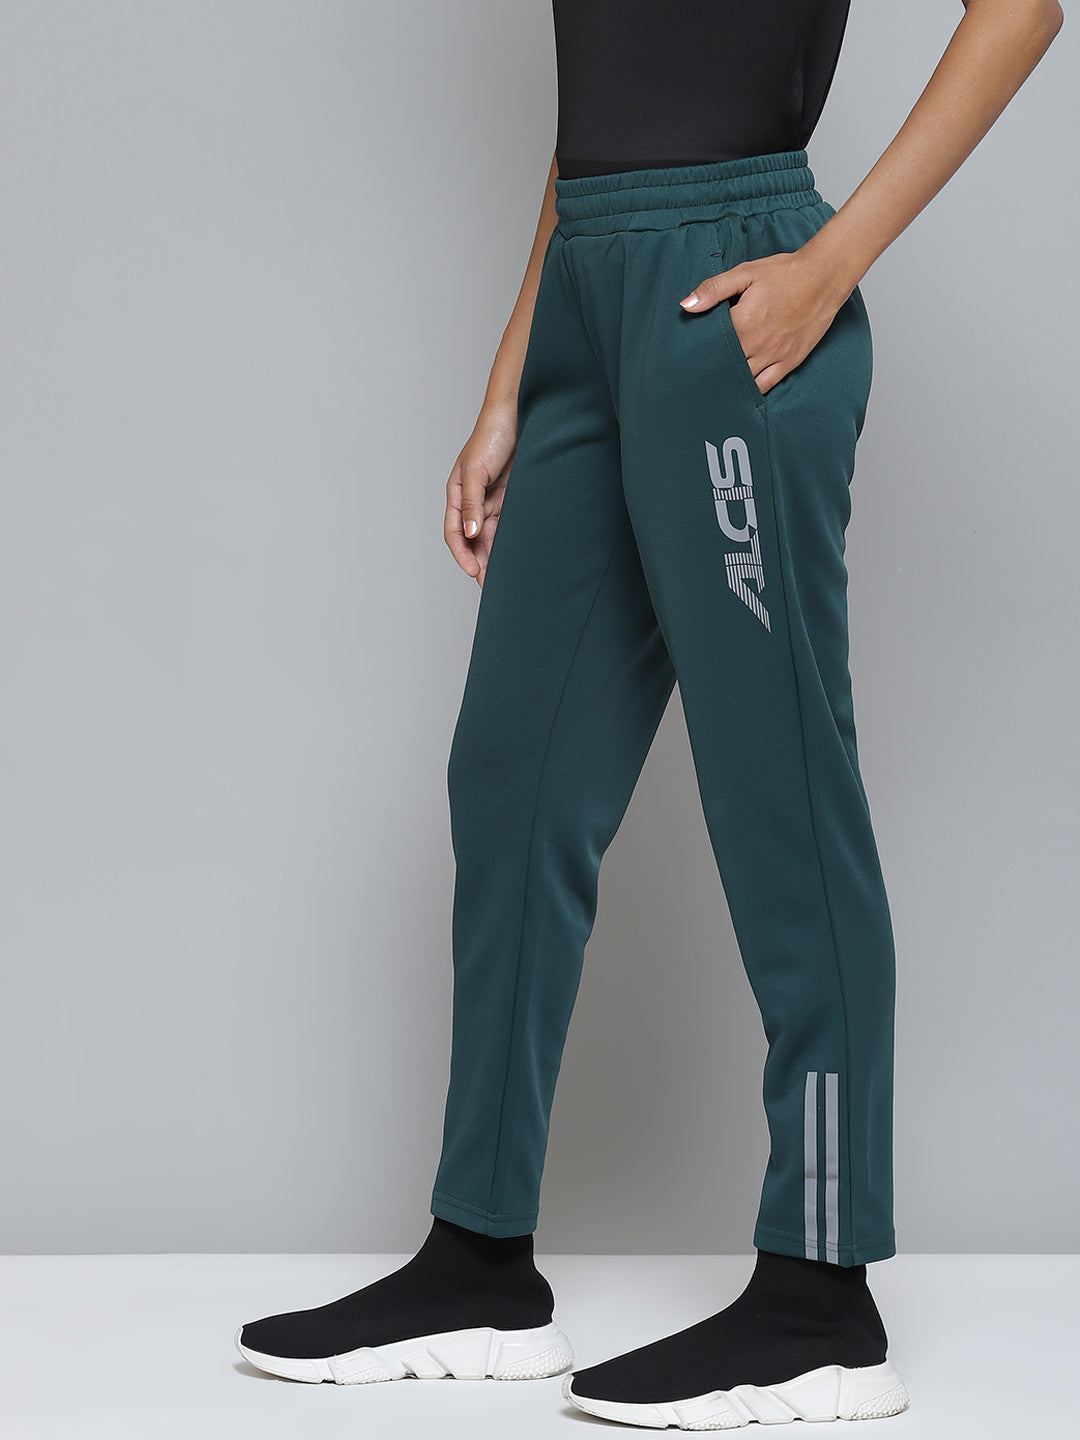 Alcis Women Teal Green Solid Track Pants